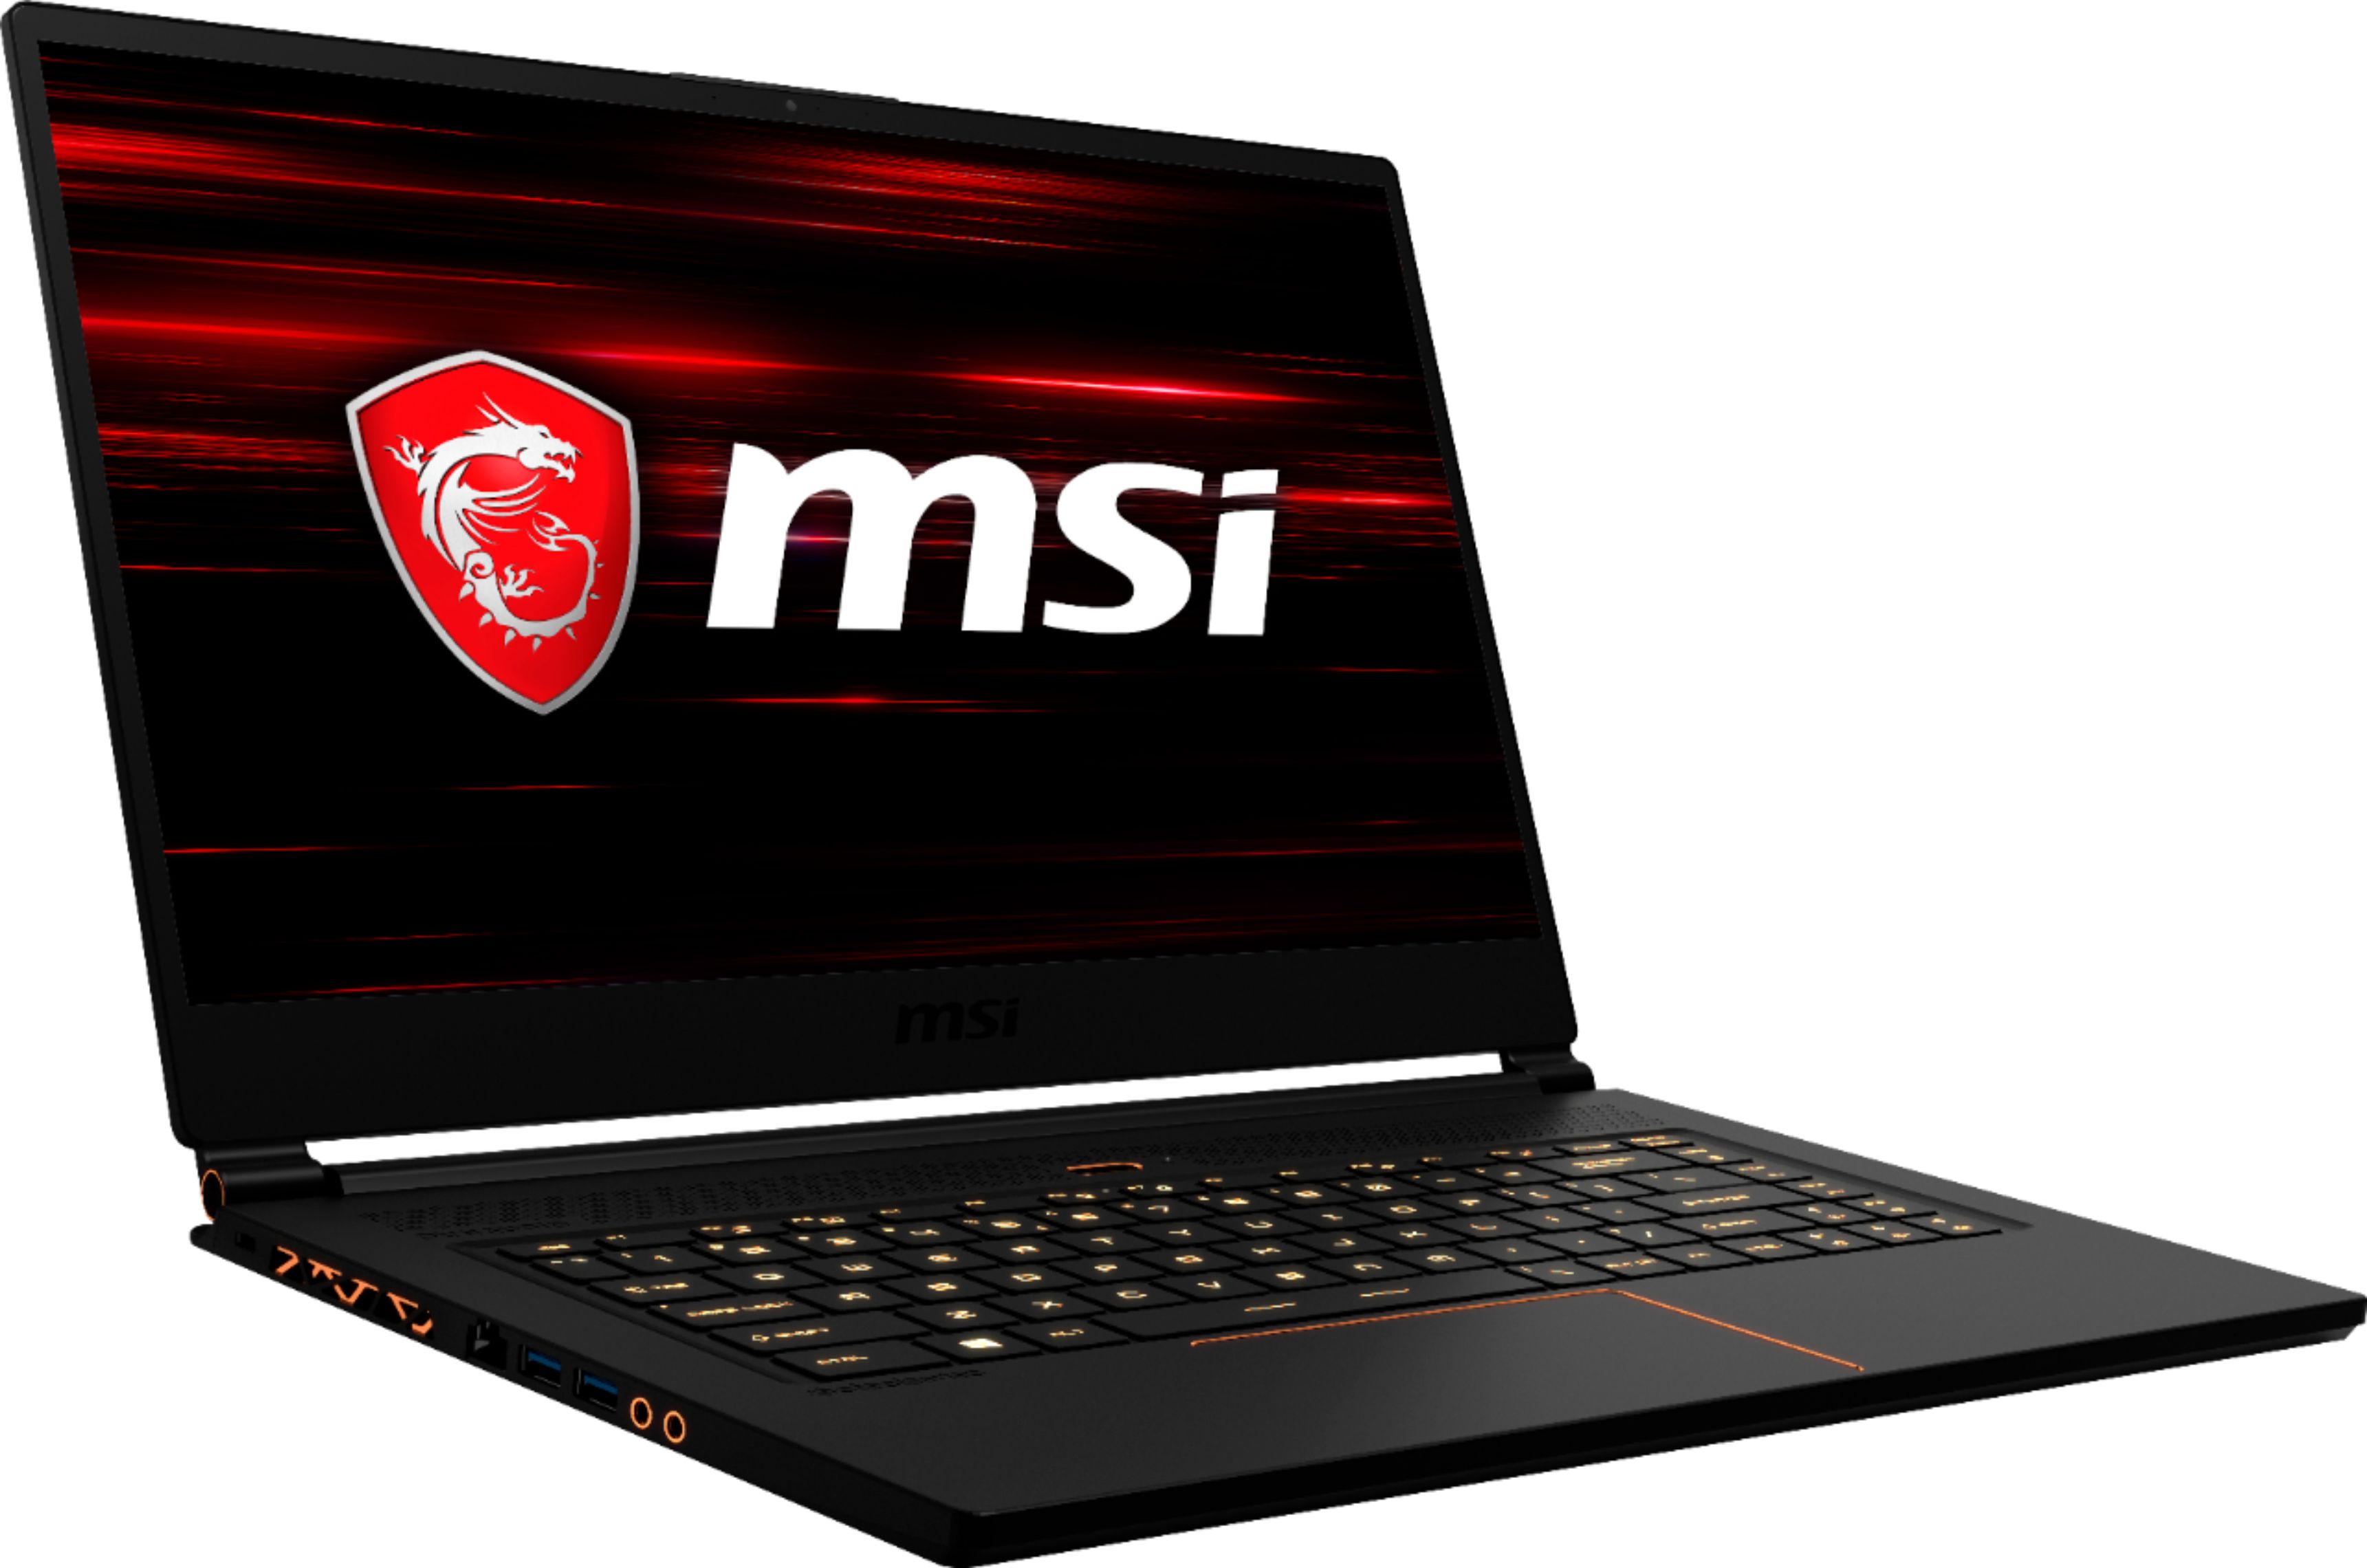 Best Buy Msi 15 6 Gaming Laptop Intel Core I7 16gb Memory Nvidia Geforce Gtx 1070 512gb Solid State Drive Matte Black With Gold Diamond Cut Gs65 Stealth Thin 037